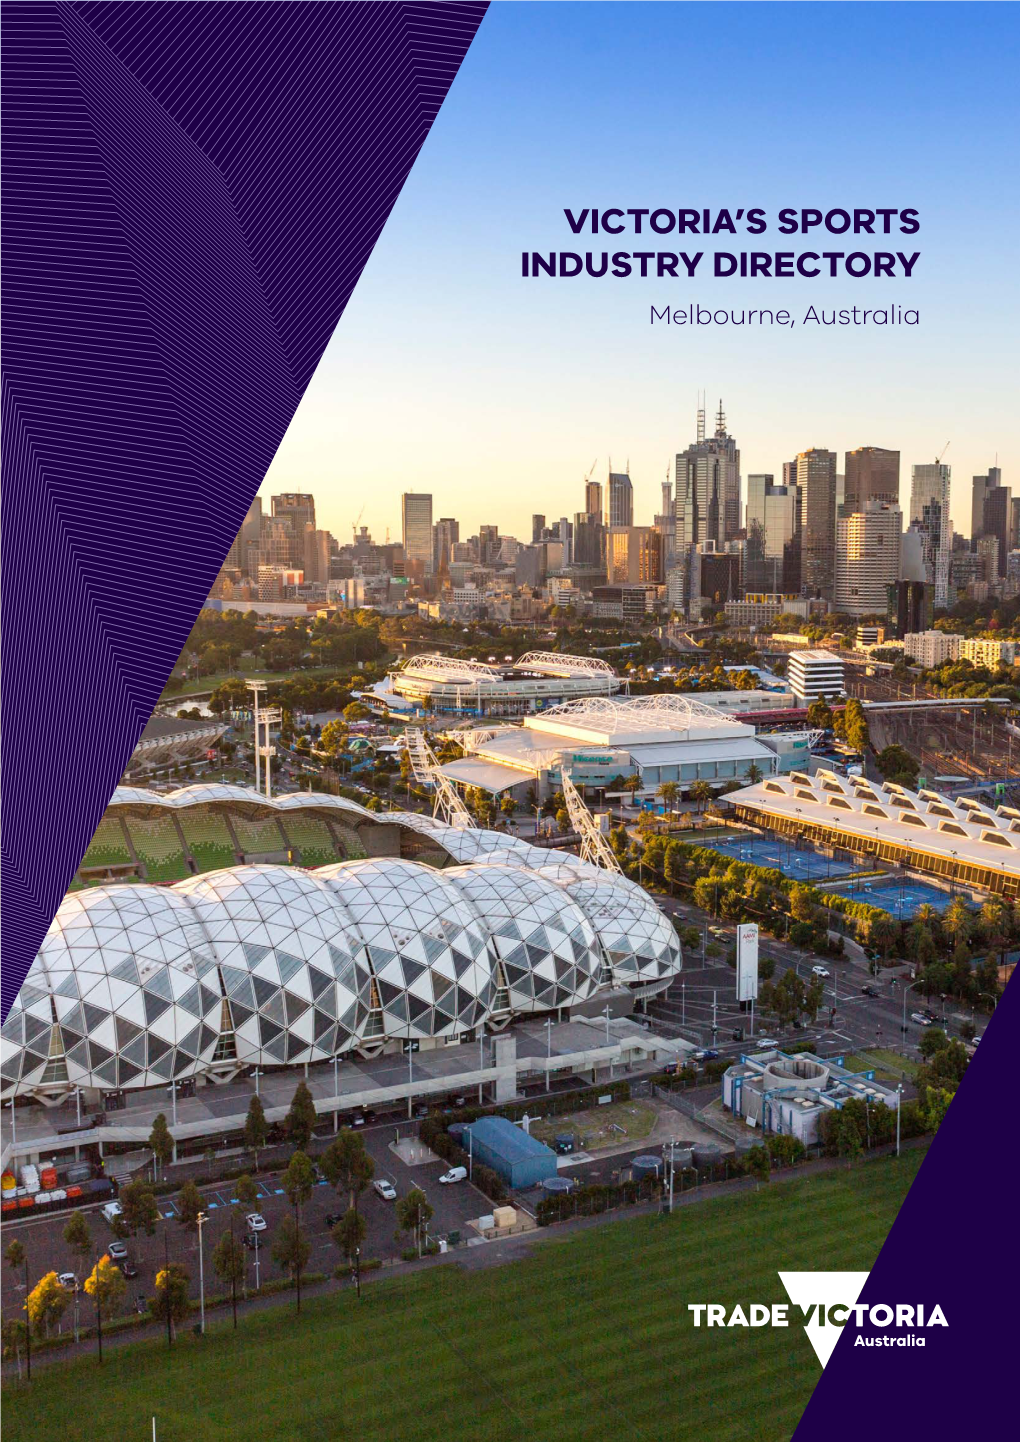 Victoria's Sports Industry Directory